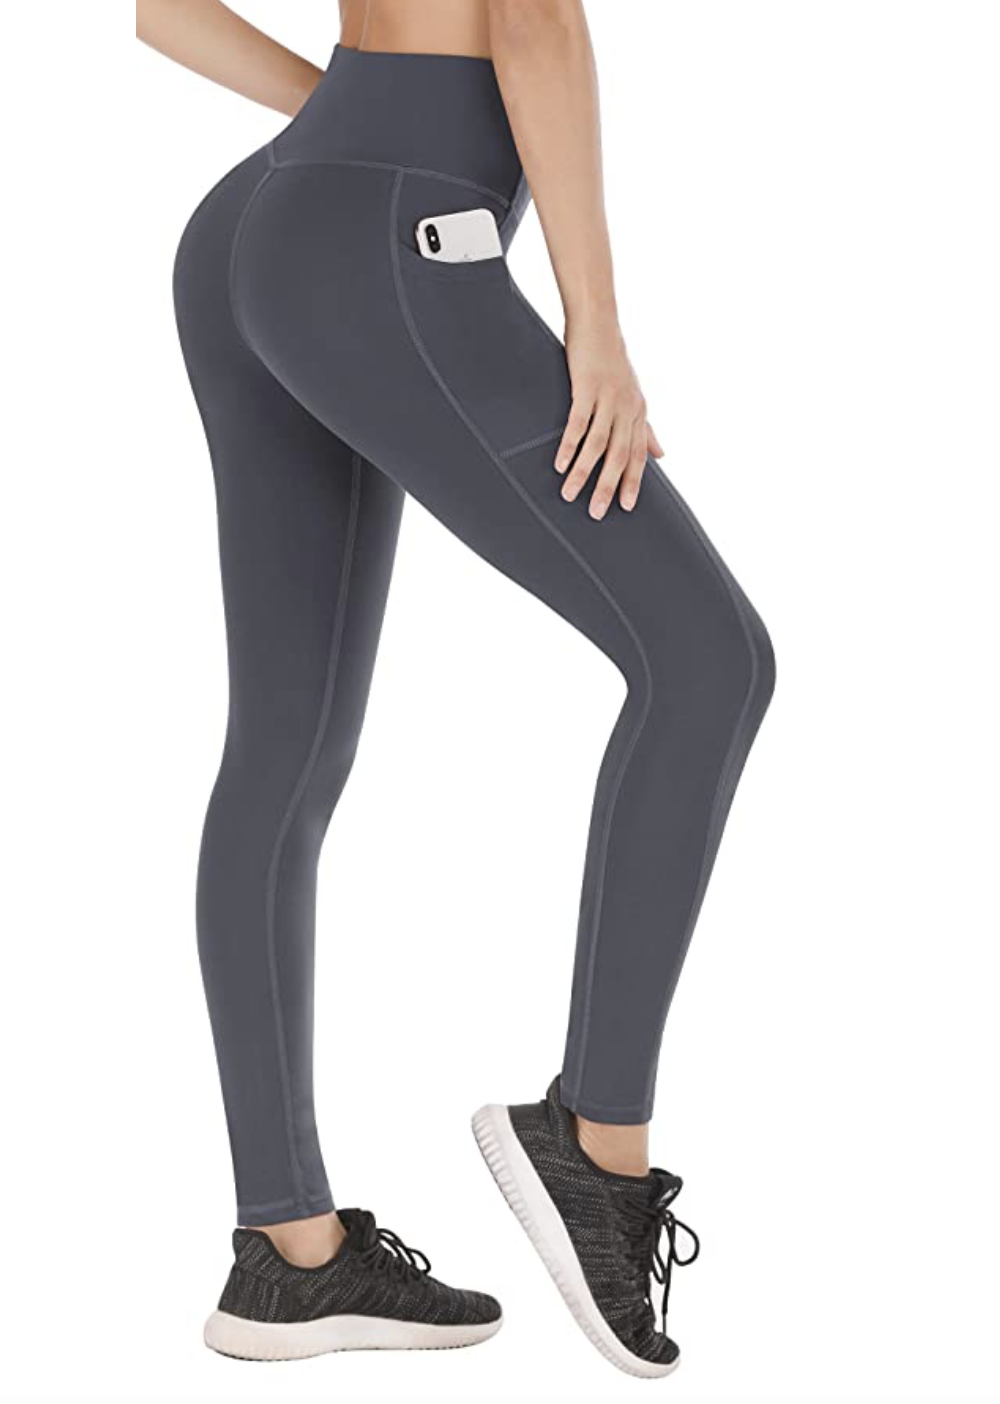 High Waisted Thermal Leggings with Pockets IUGA Fleece Lined Yoga Pants with Pockets for Women 